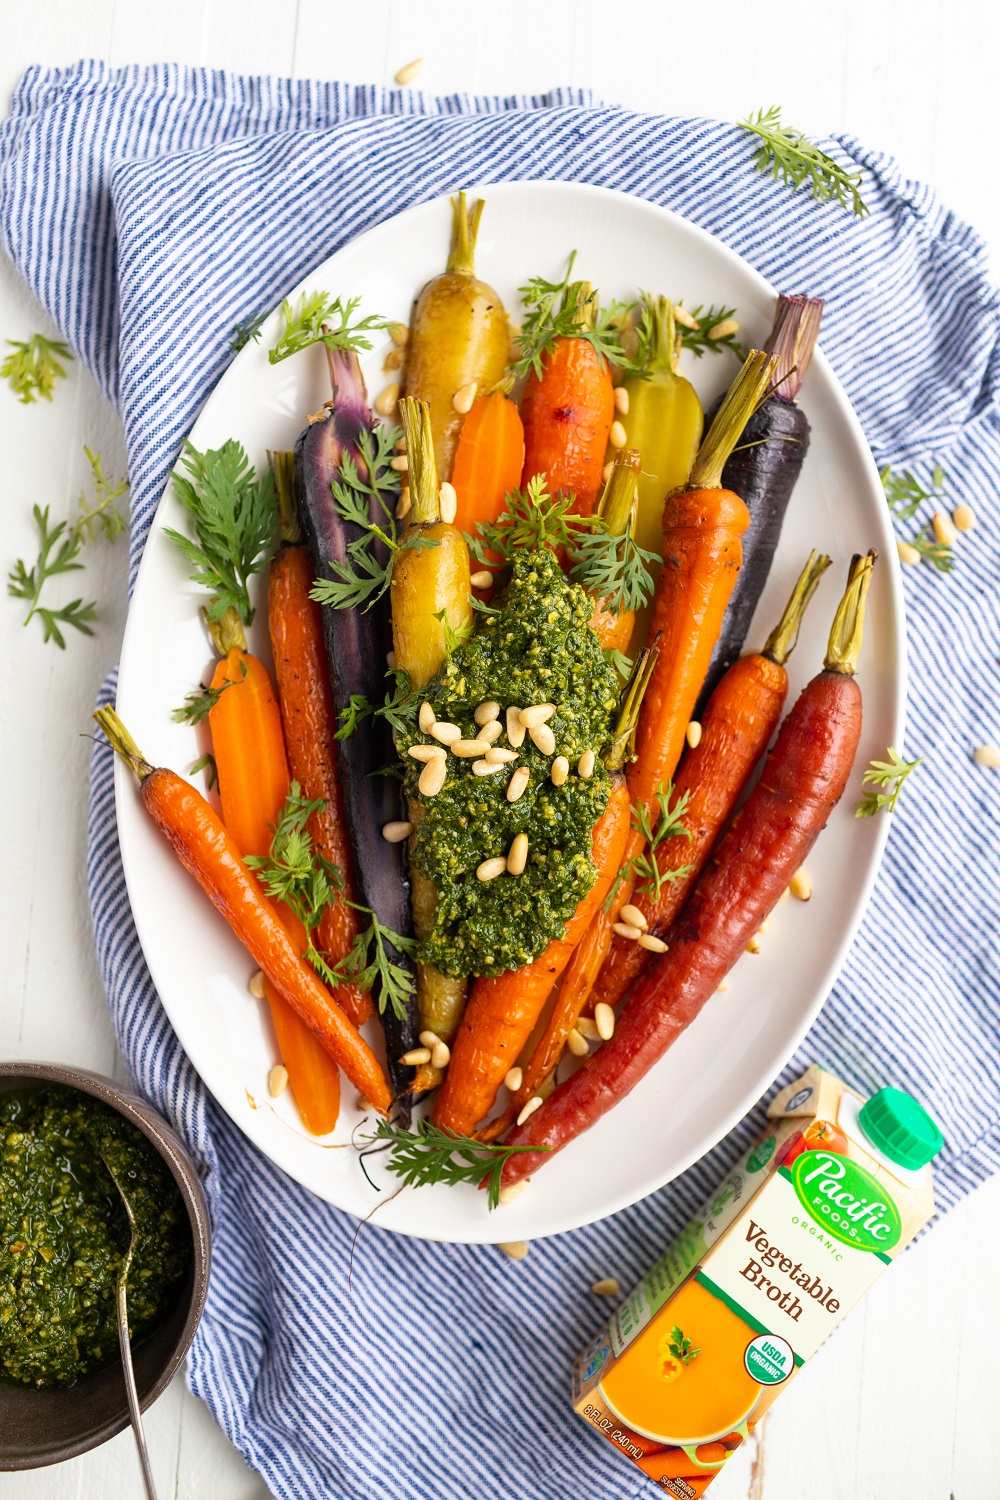 Whole Roasted Rainbow Carrots with Carrot Top Pesto Recipe - Pacific Foods